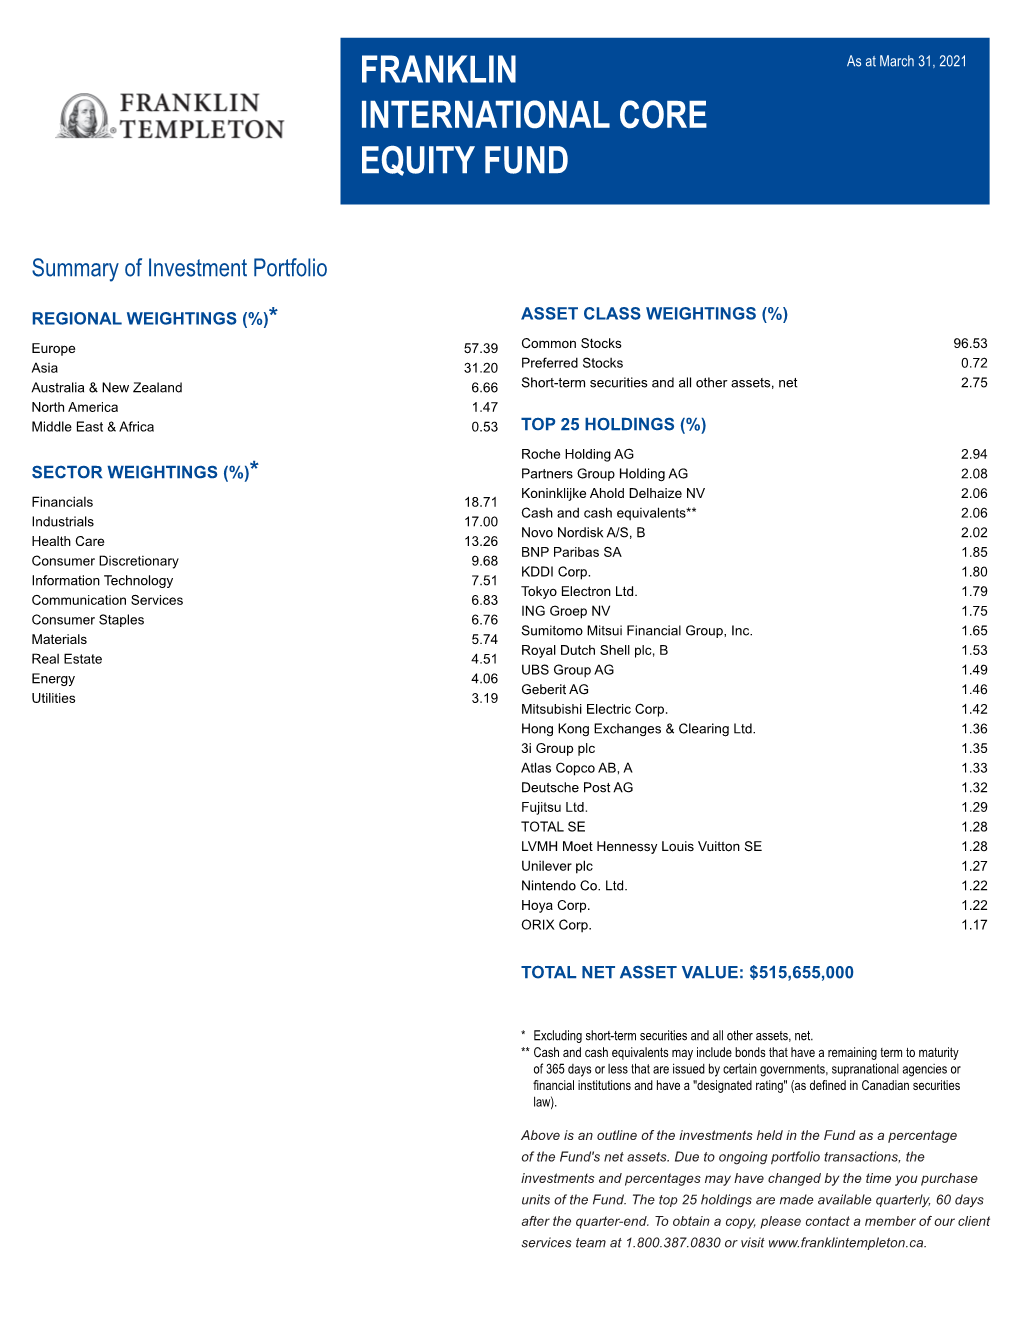 Franklin International Core Equity Fund